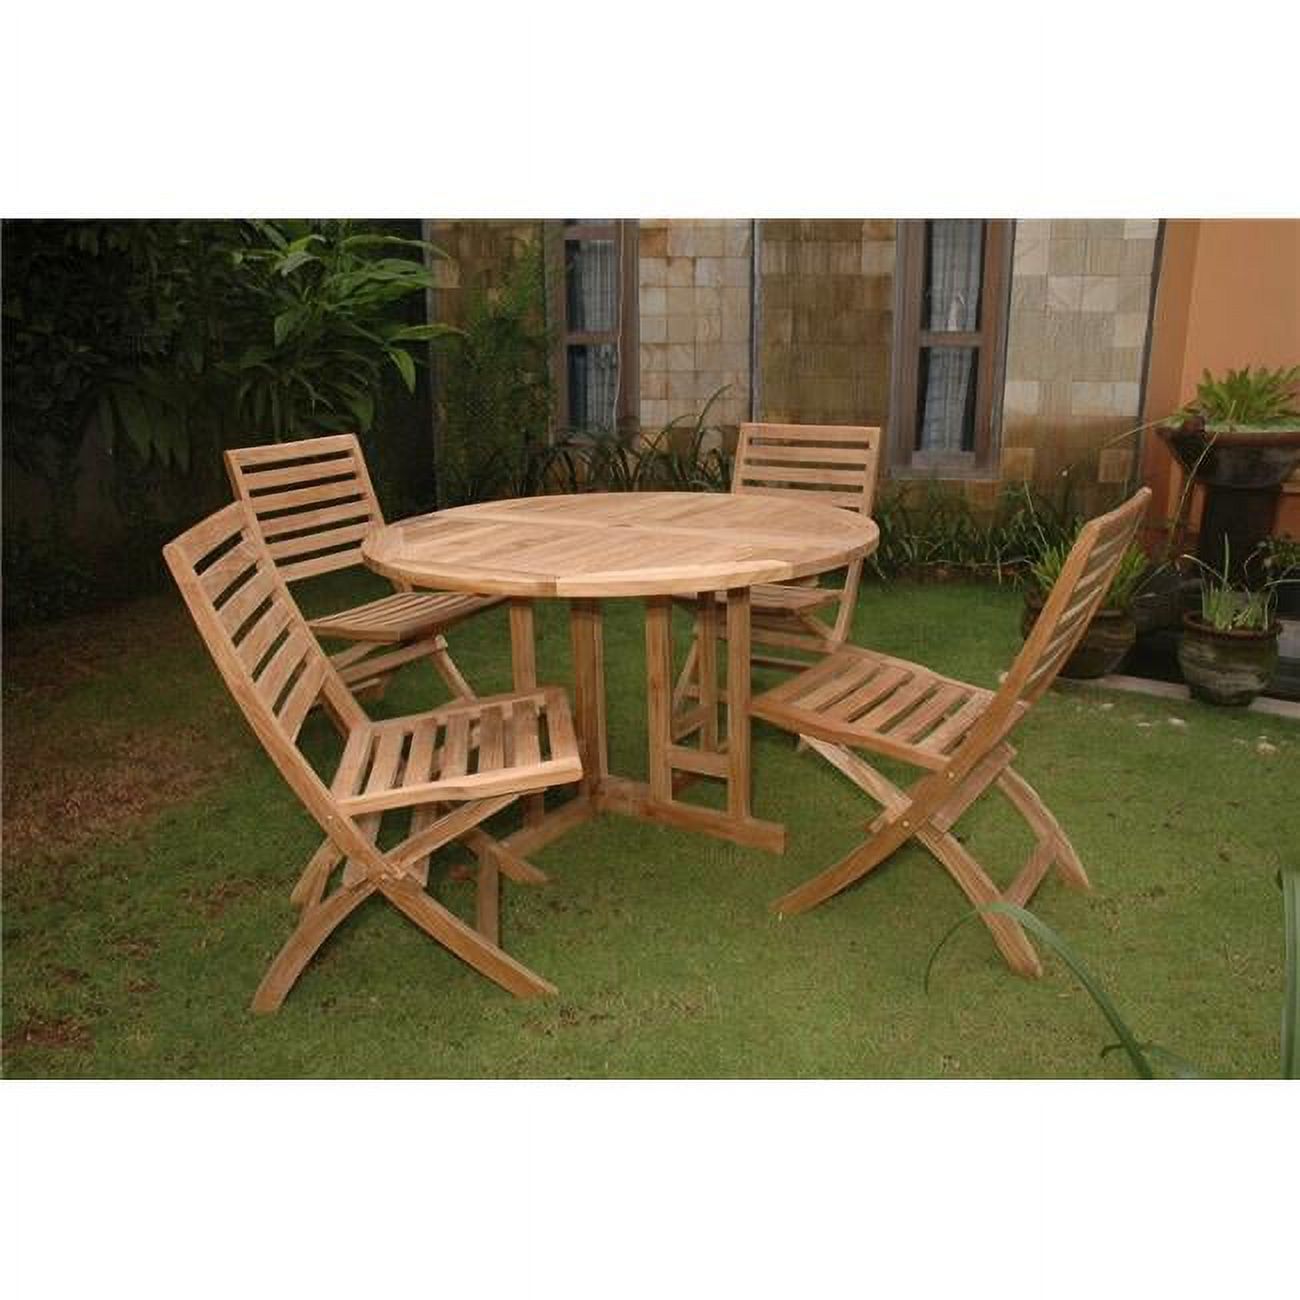 Anderson Teak Butterfly 47" Round Folding Table - image 1 of 4